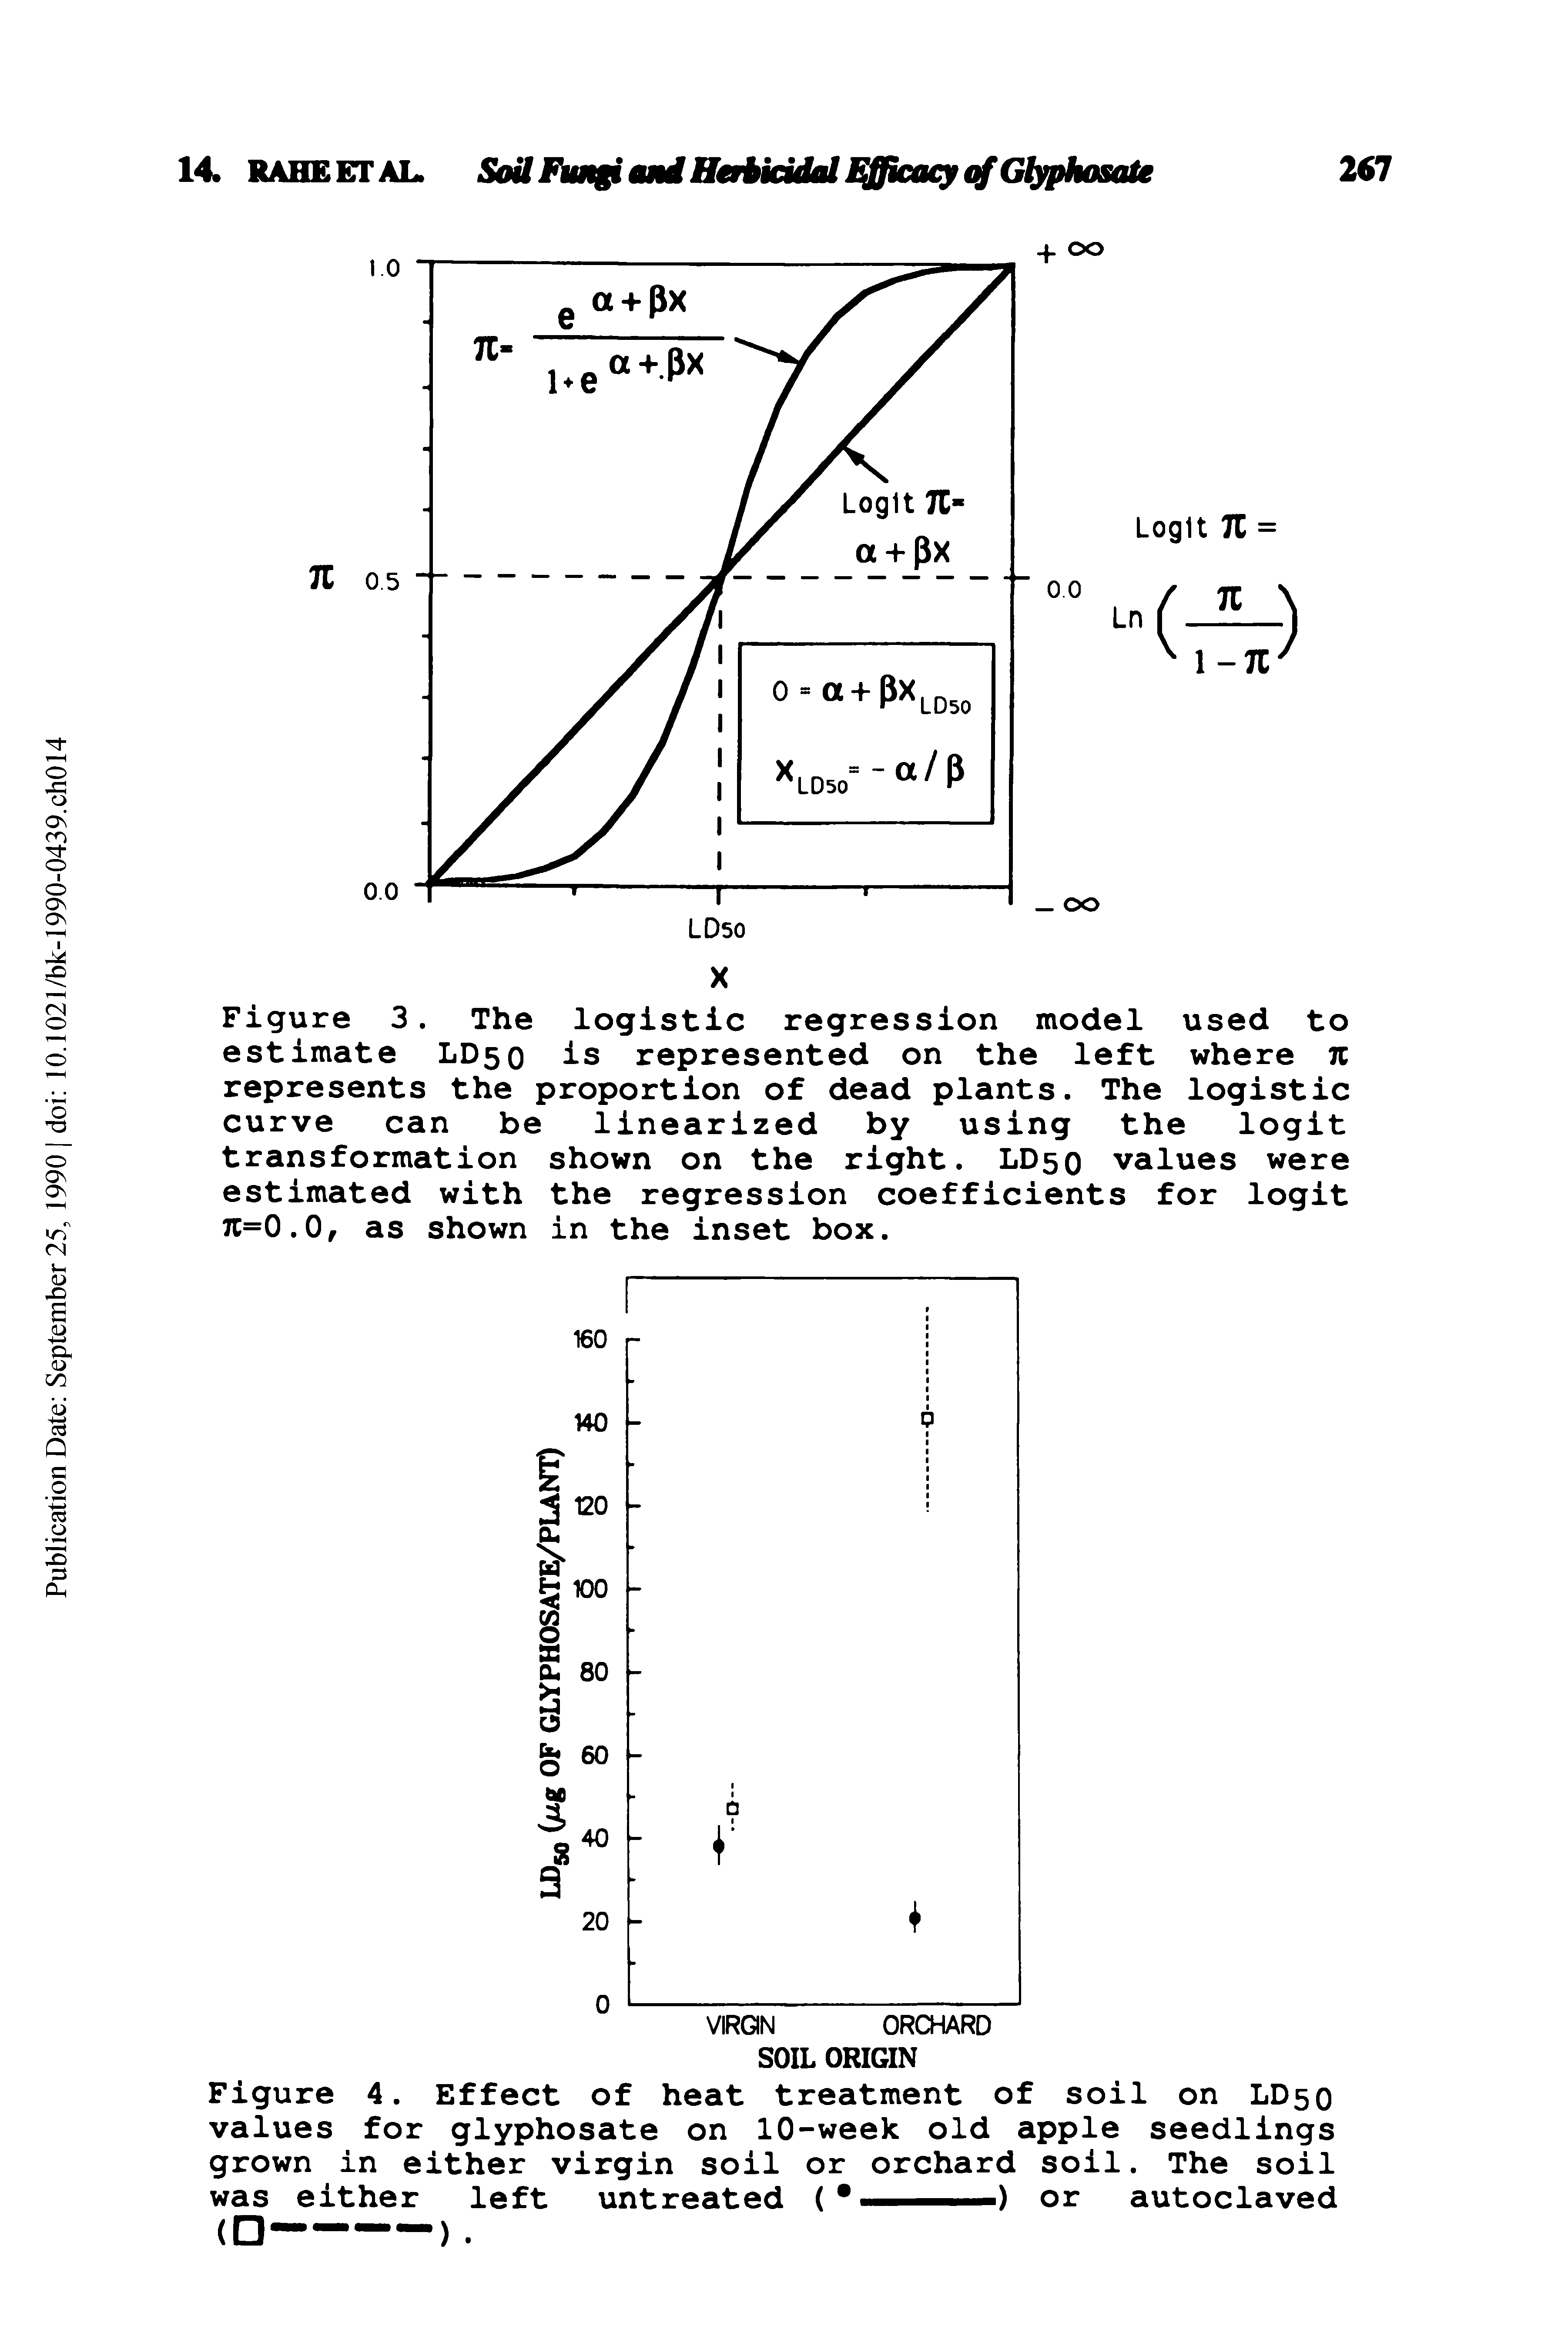 Figure 3. The logistic regression model used to estimate LD50 is represented on the left where 7C represents the proportion of dead plants. The logistic curve can be linearized by using the logit transformation shown on the right. LD50 values were estimated with the regression coefficients for logit 7C=0.0, as shown in the inset box.